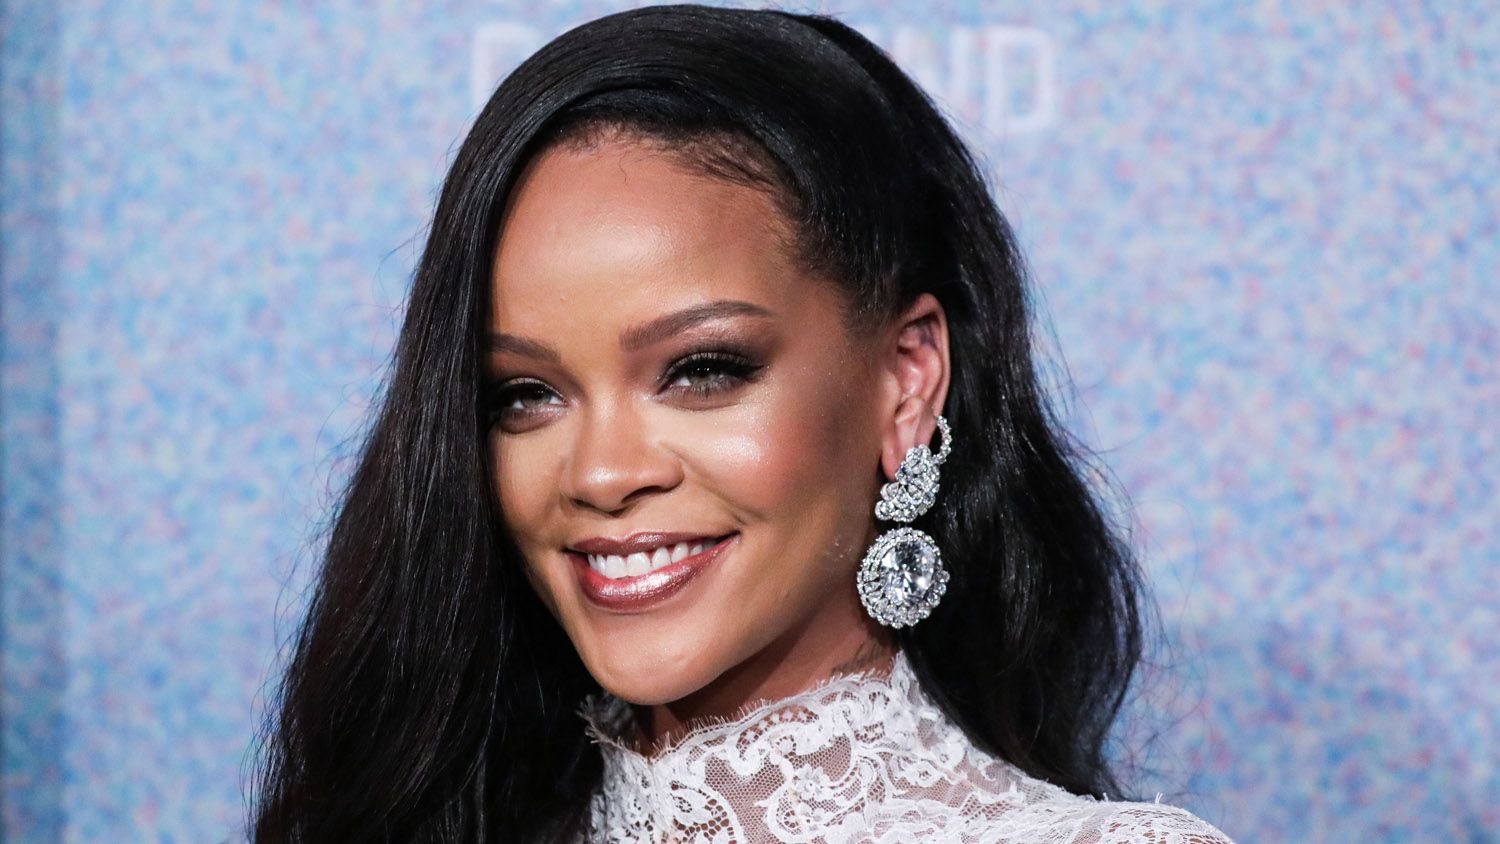 Rihanna had a message for fan asking her about new music again